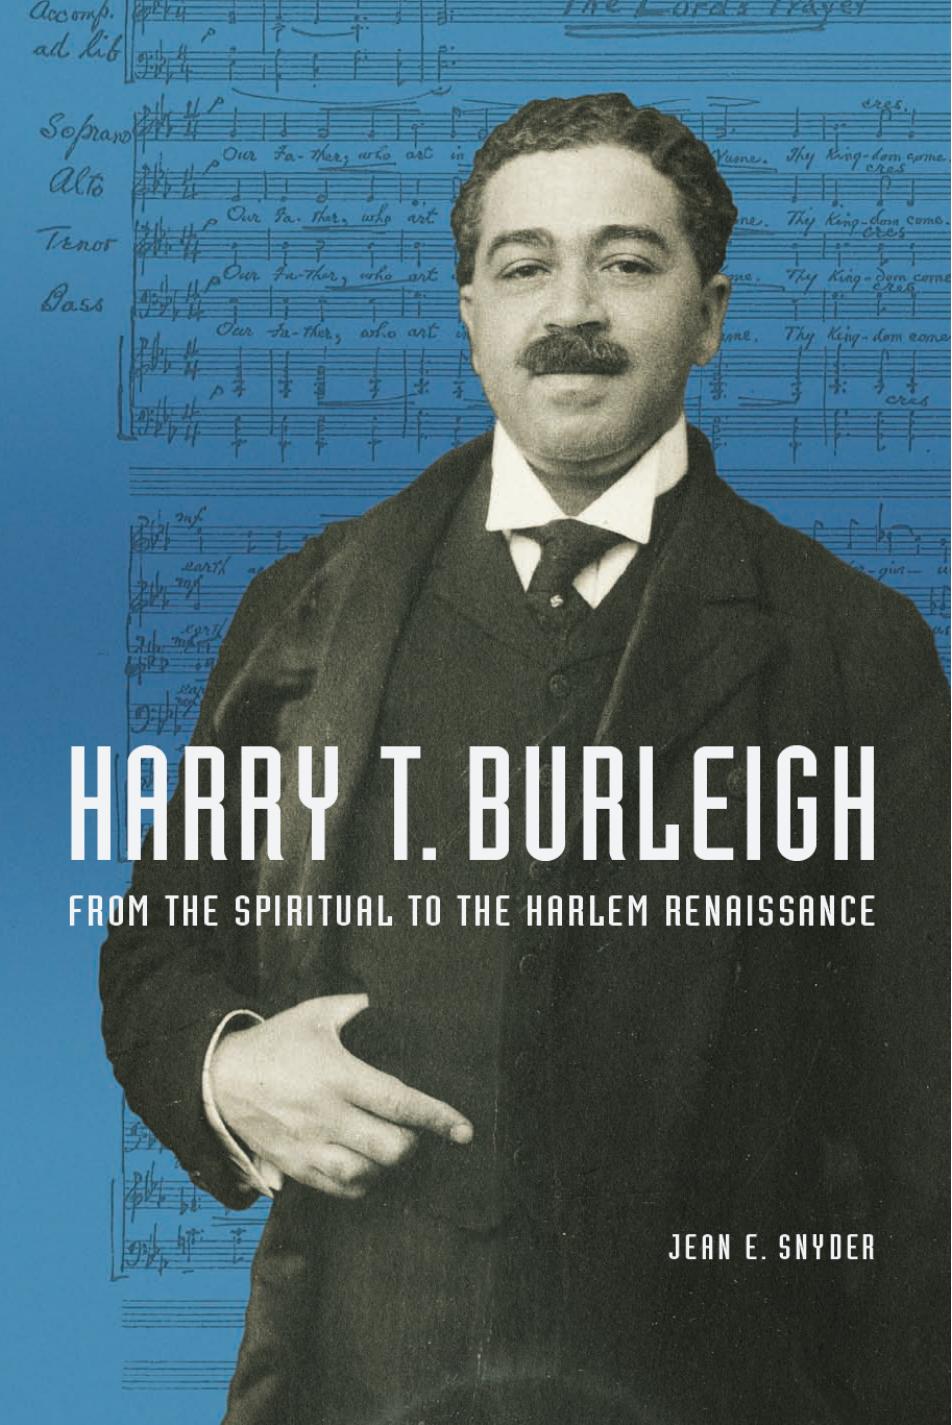 Harry T. Burleigh: From the Spiritual to the Harlem Renaissance by Jean E Snyder